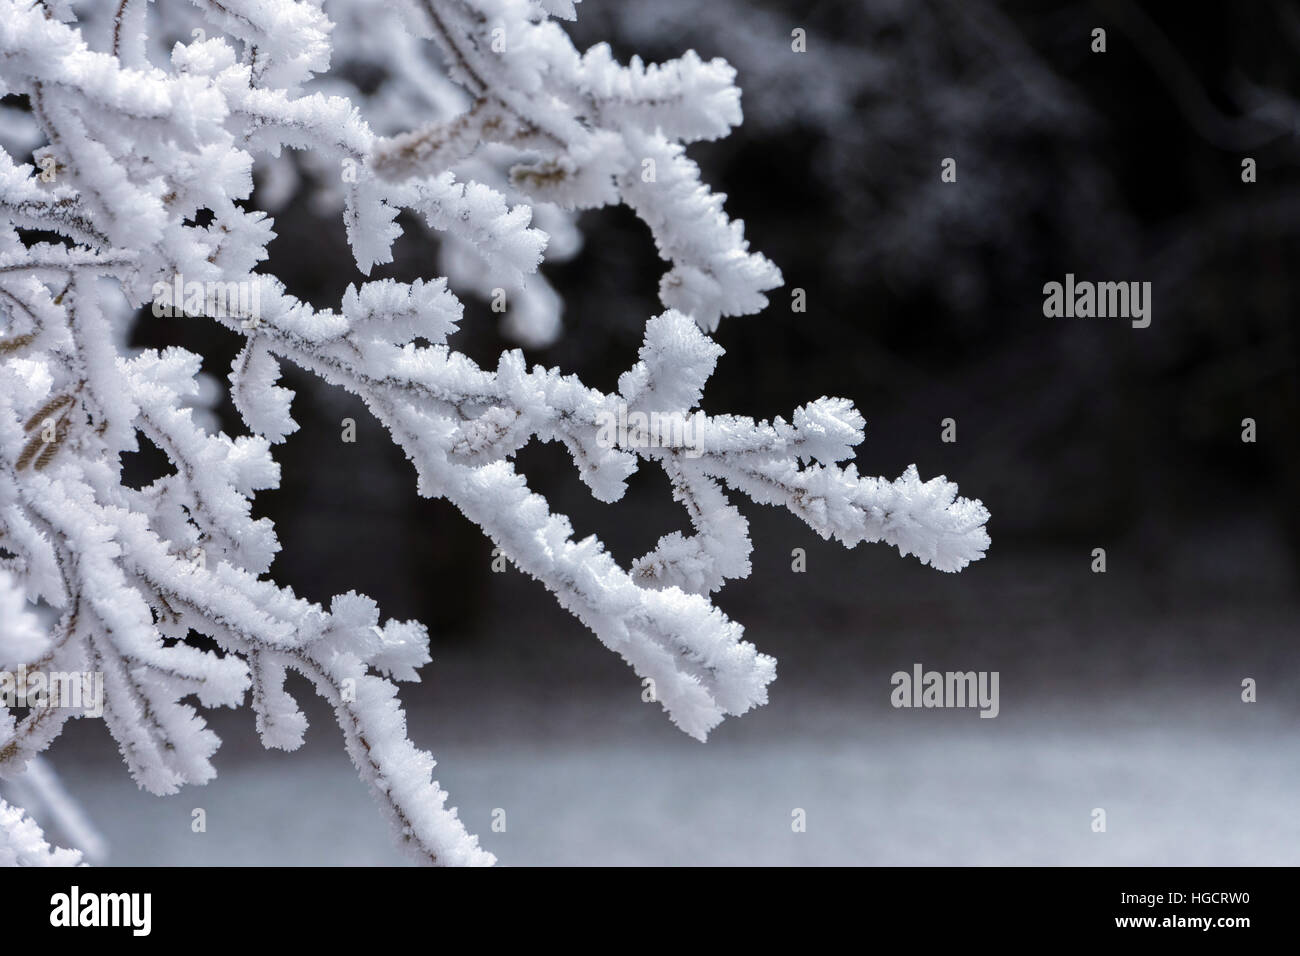 Hoarfrost frost on branches against dark backdrop Stock Photo